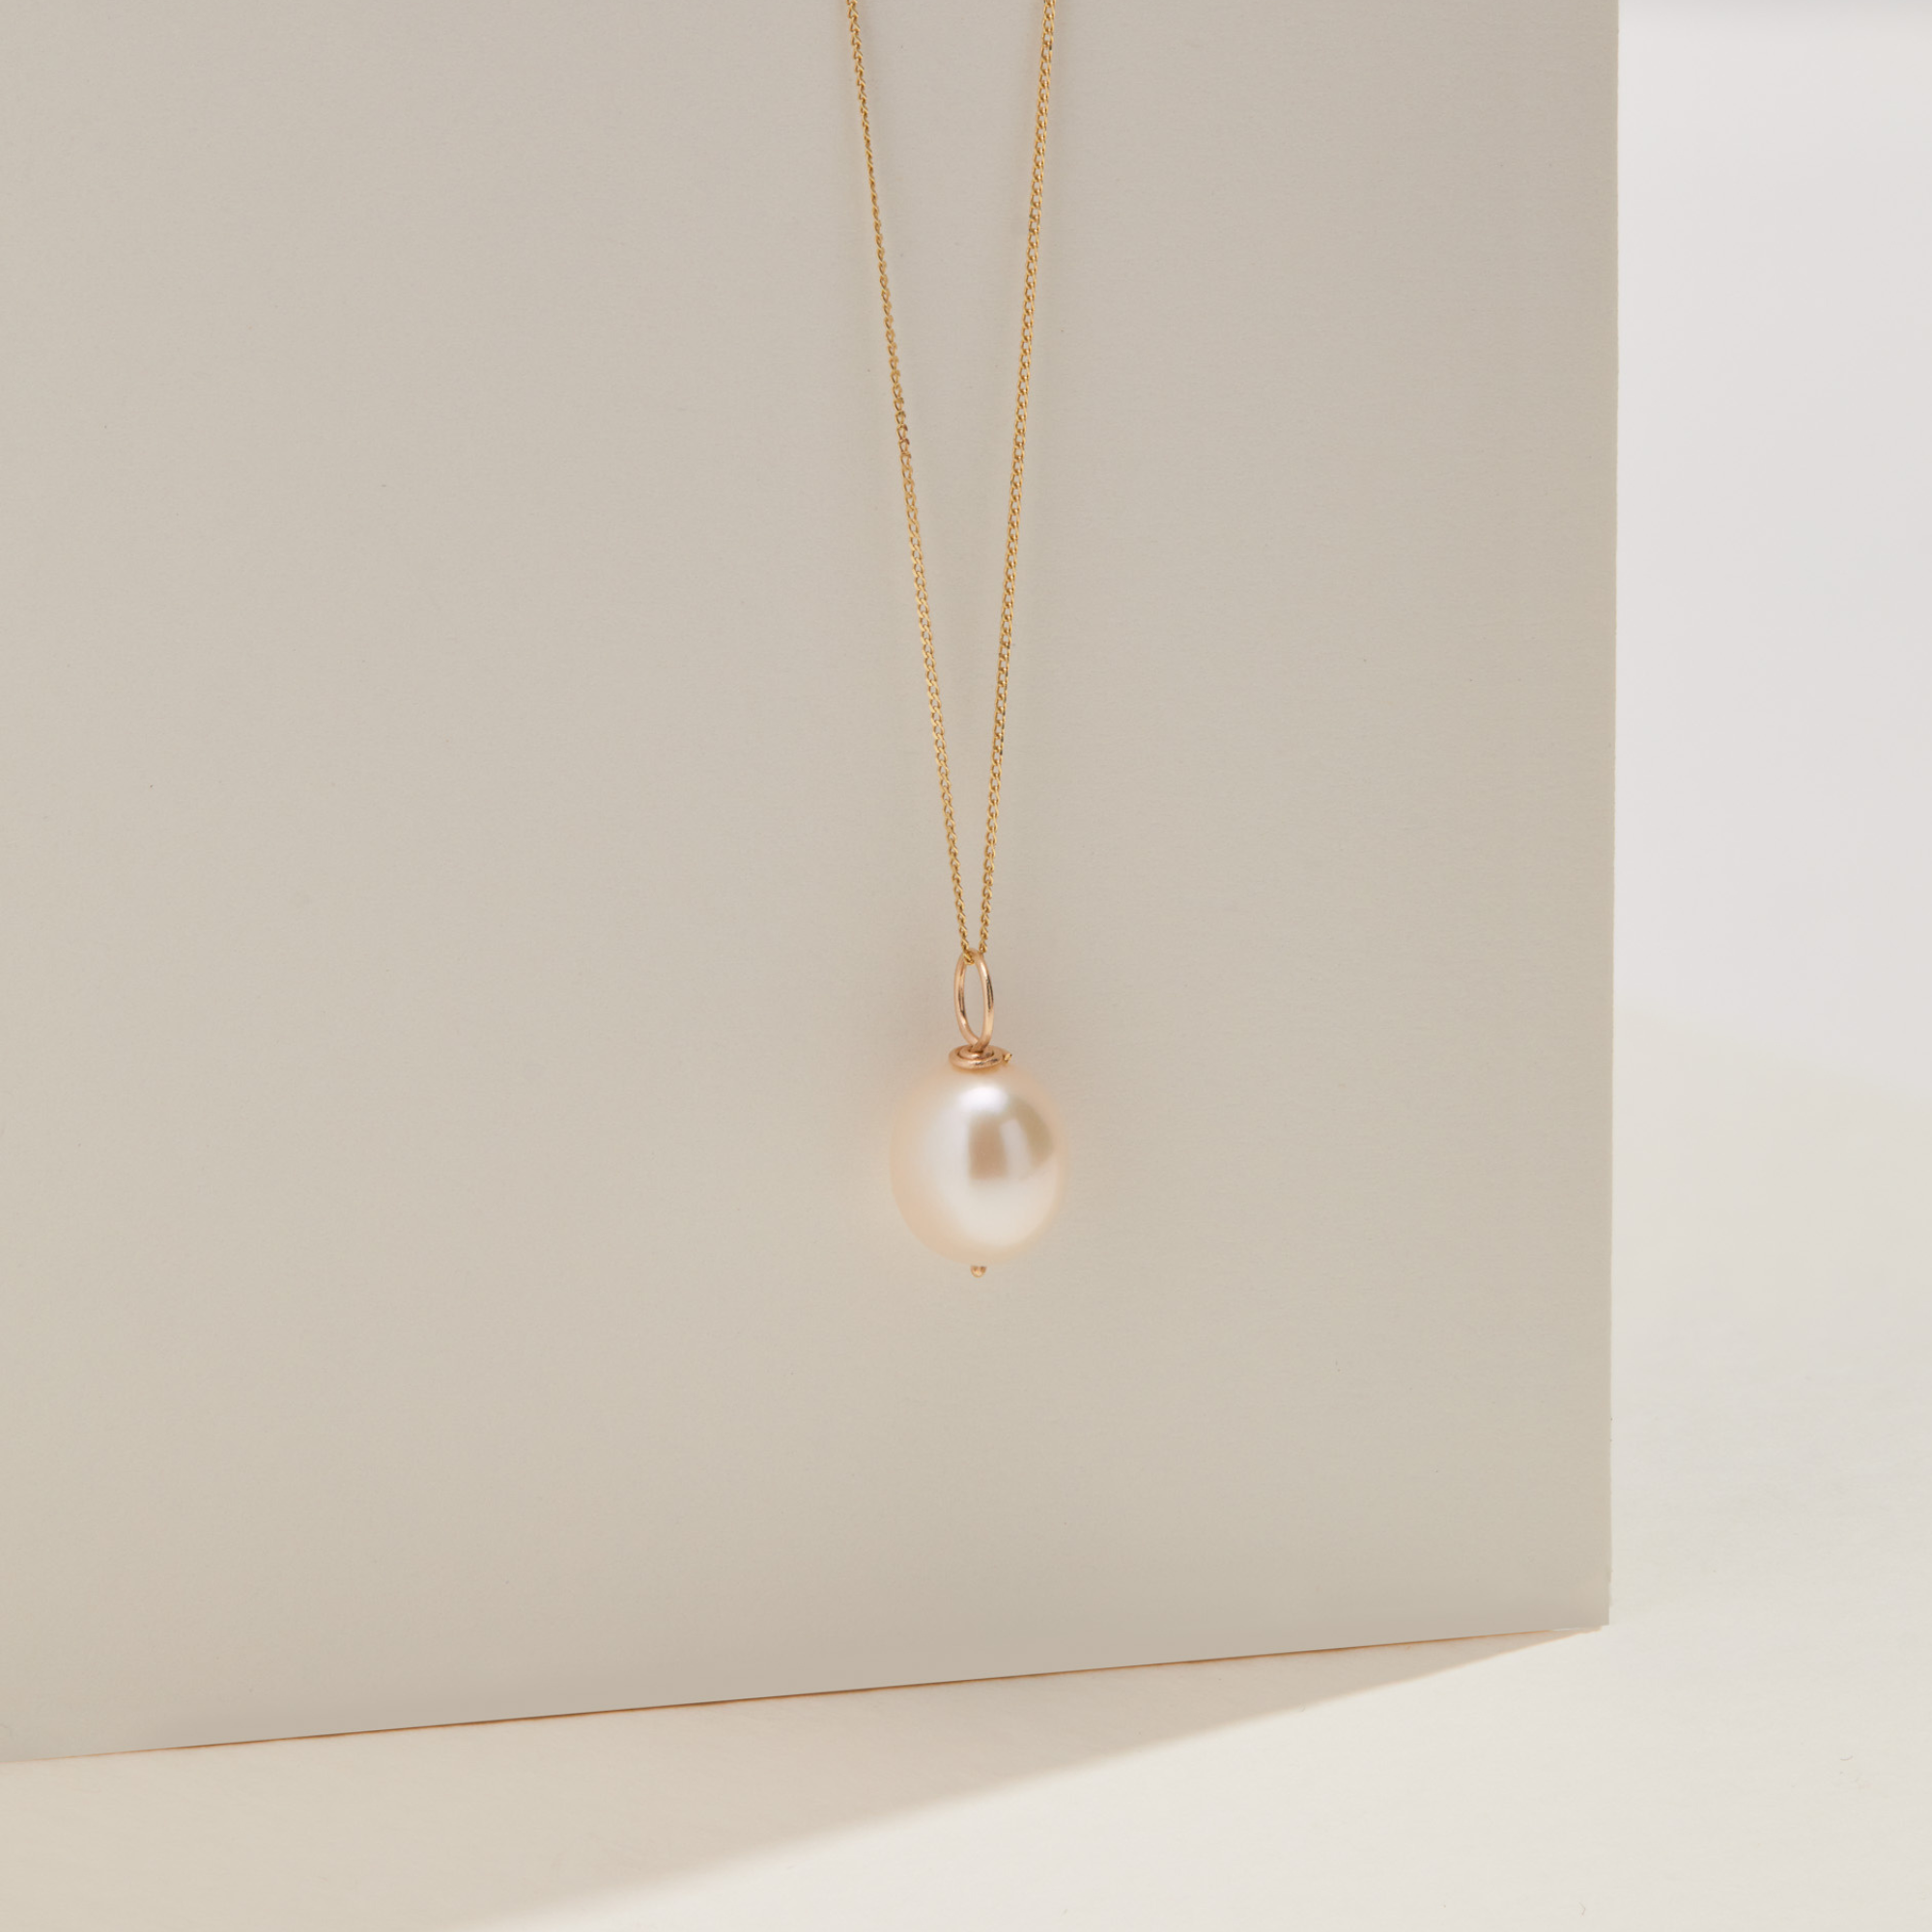 Gold large single pearl necklace infront of a cream board